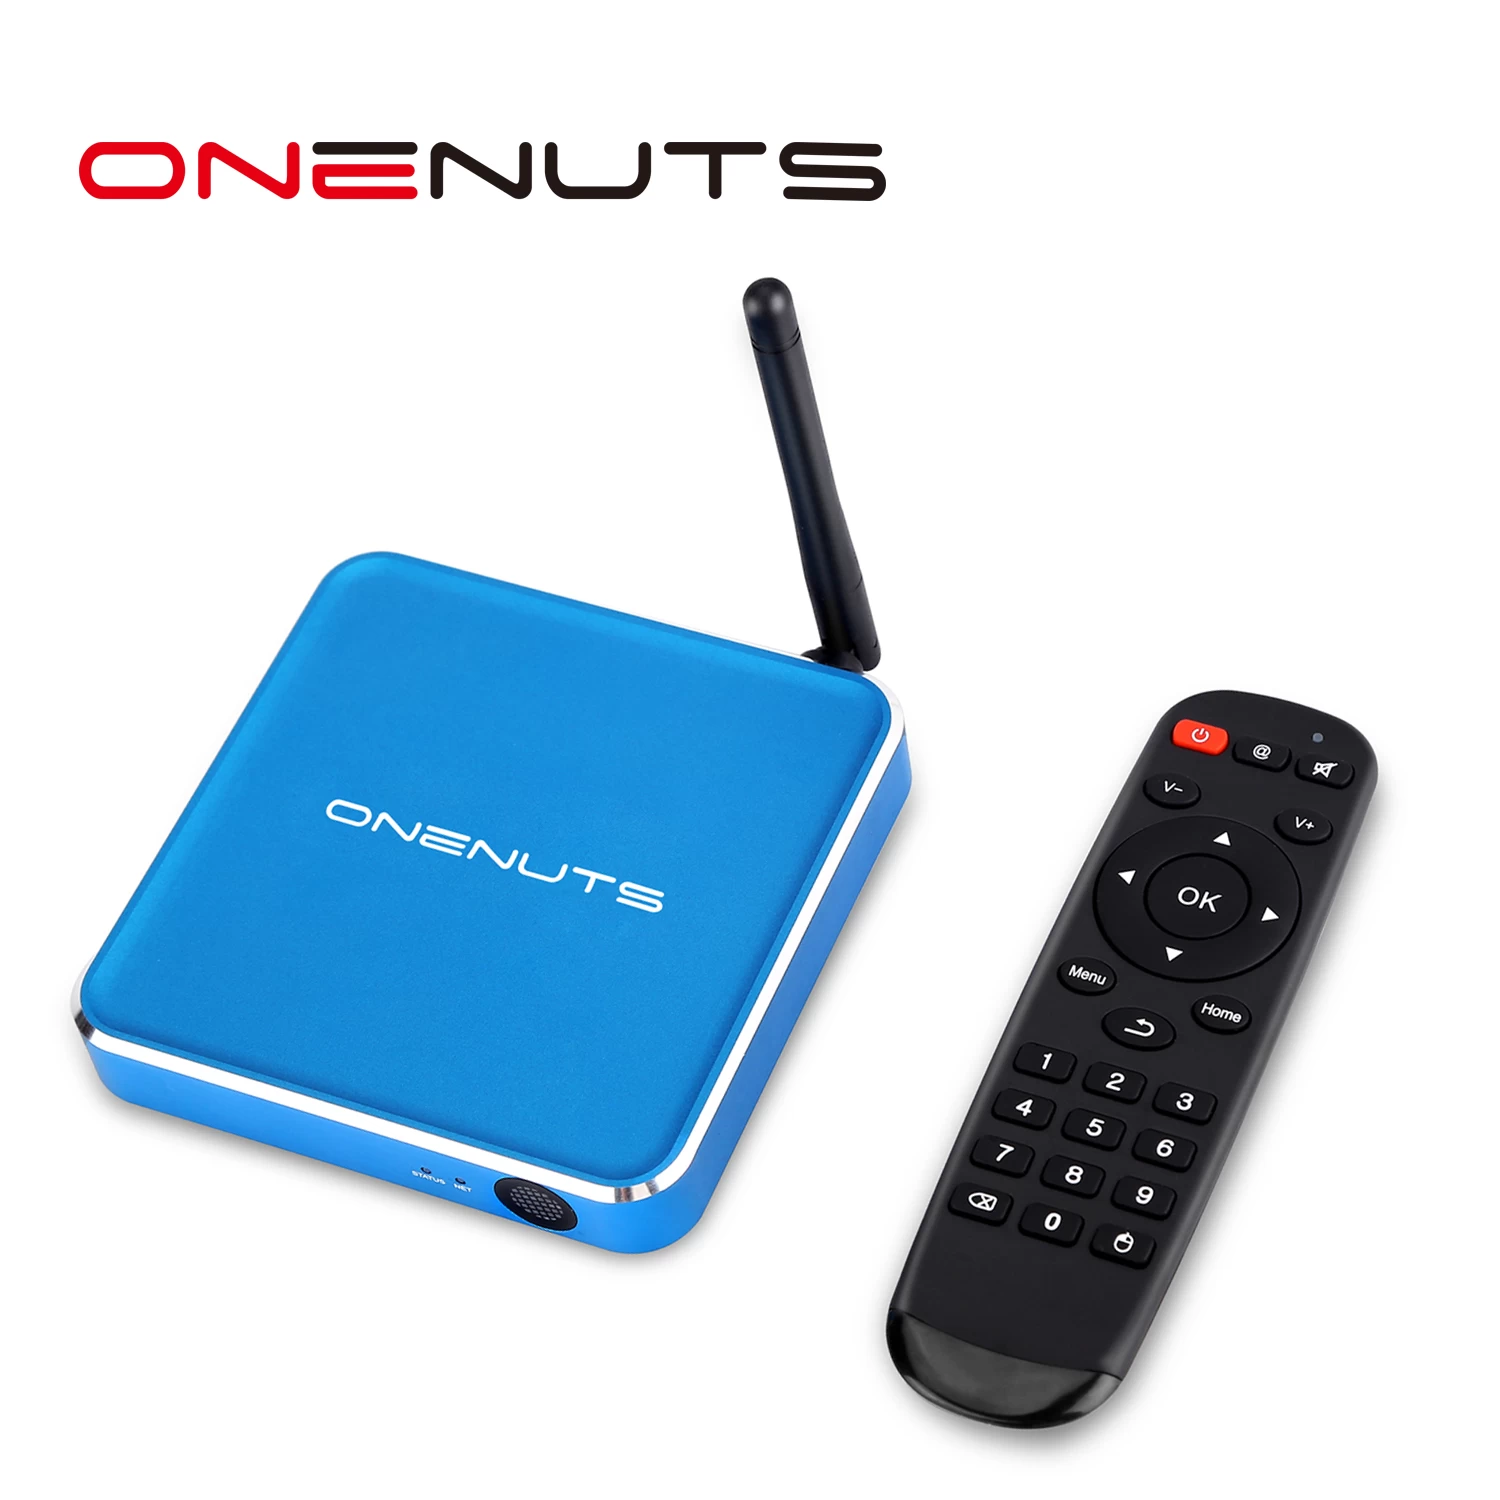 Realtek RTD1295 Android TV Box, 4 k Android TV Box fabricant Chine